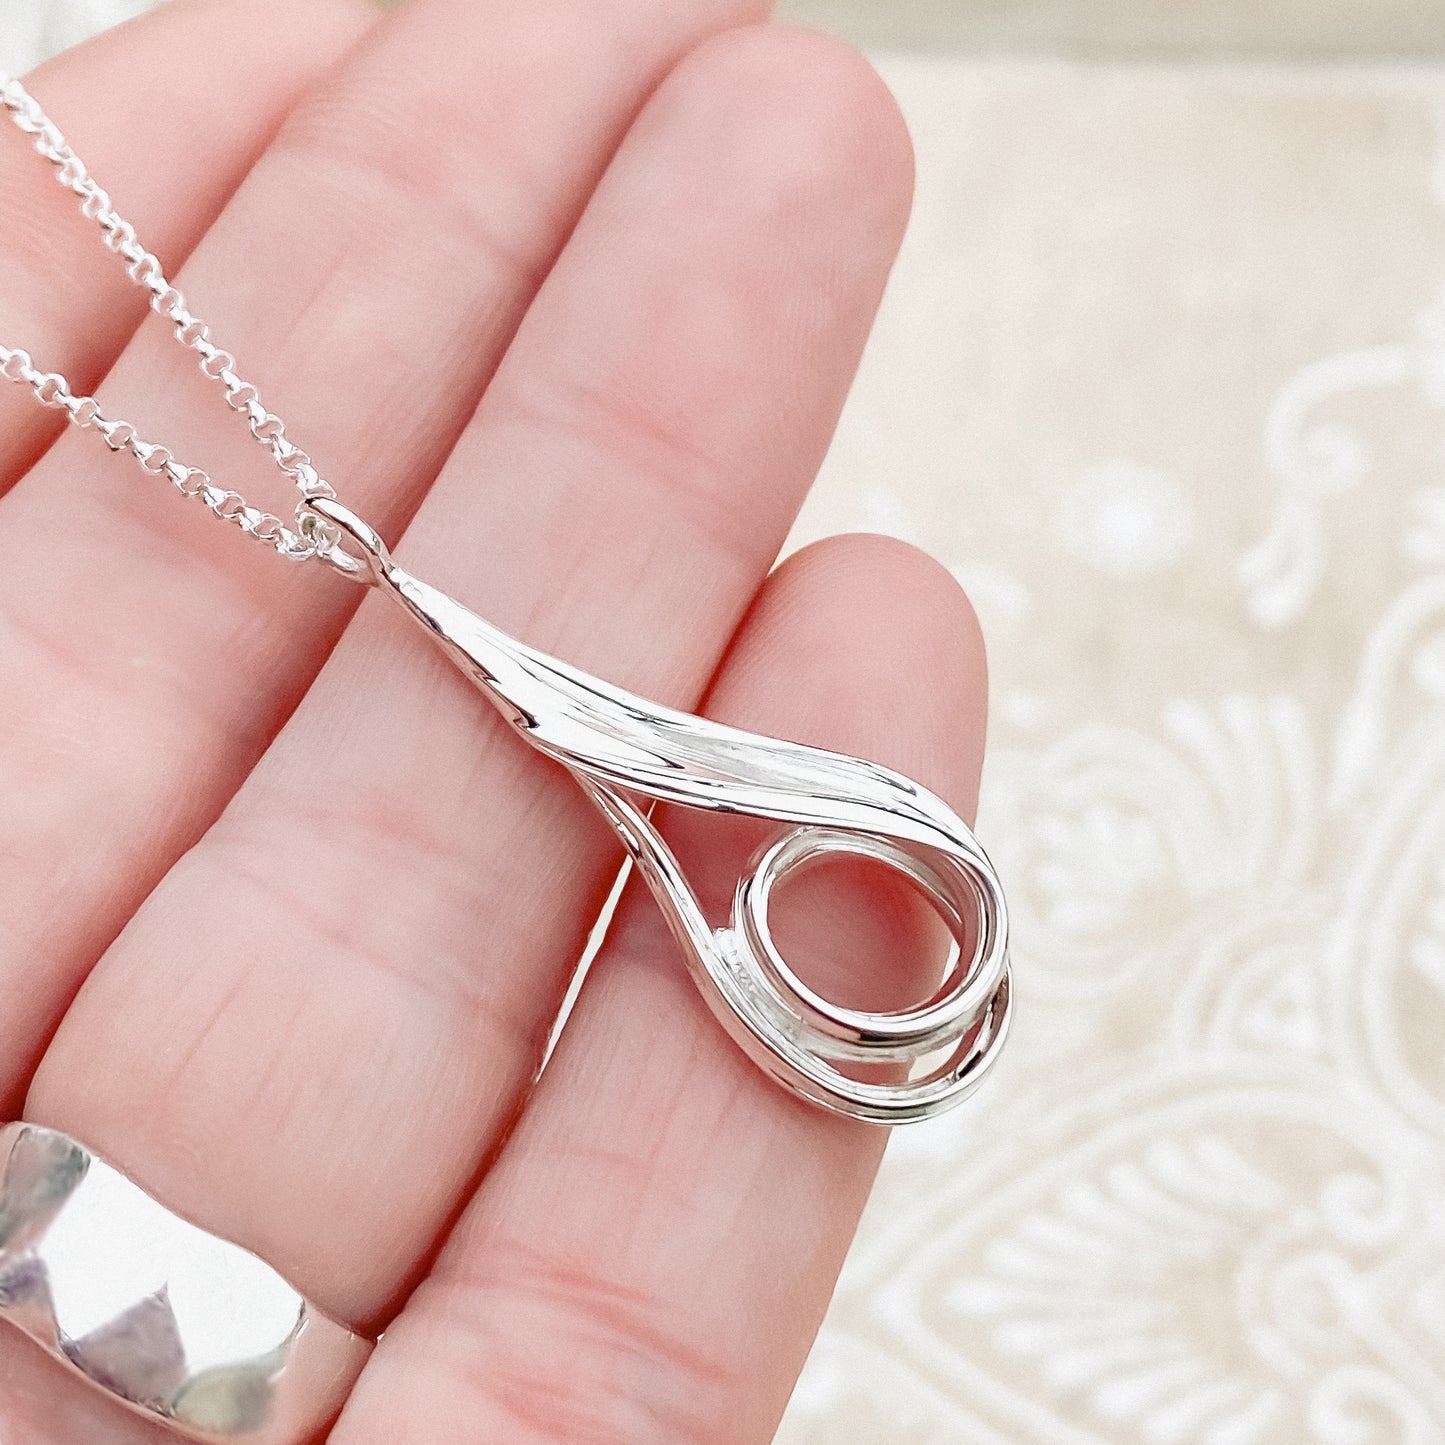 Drift Sterling Silver Necklace